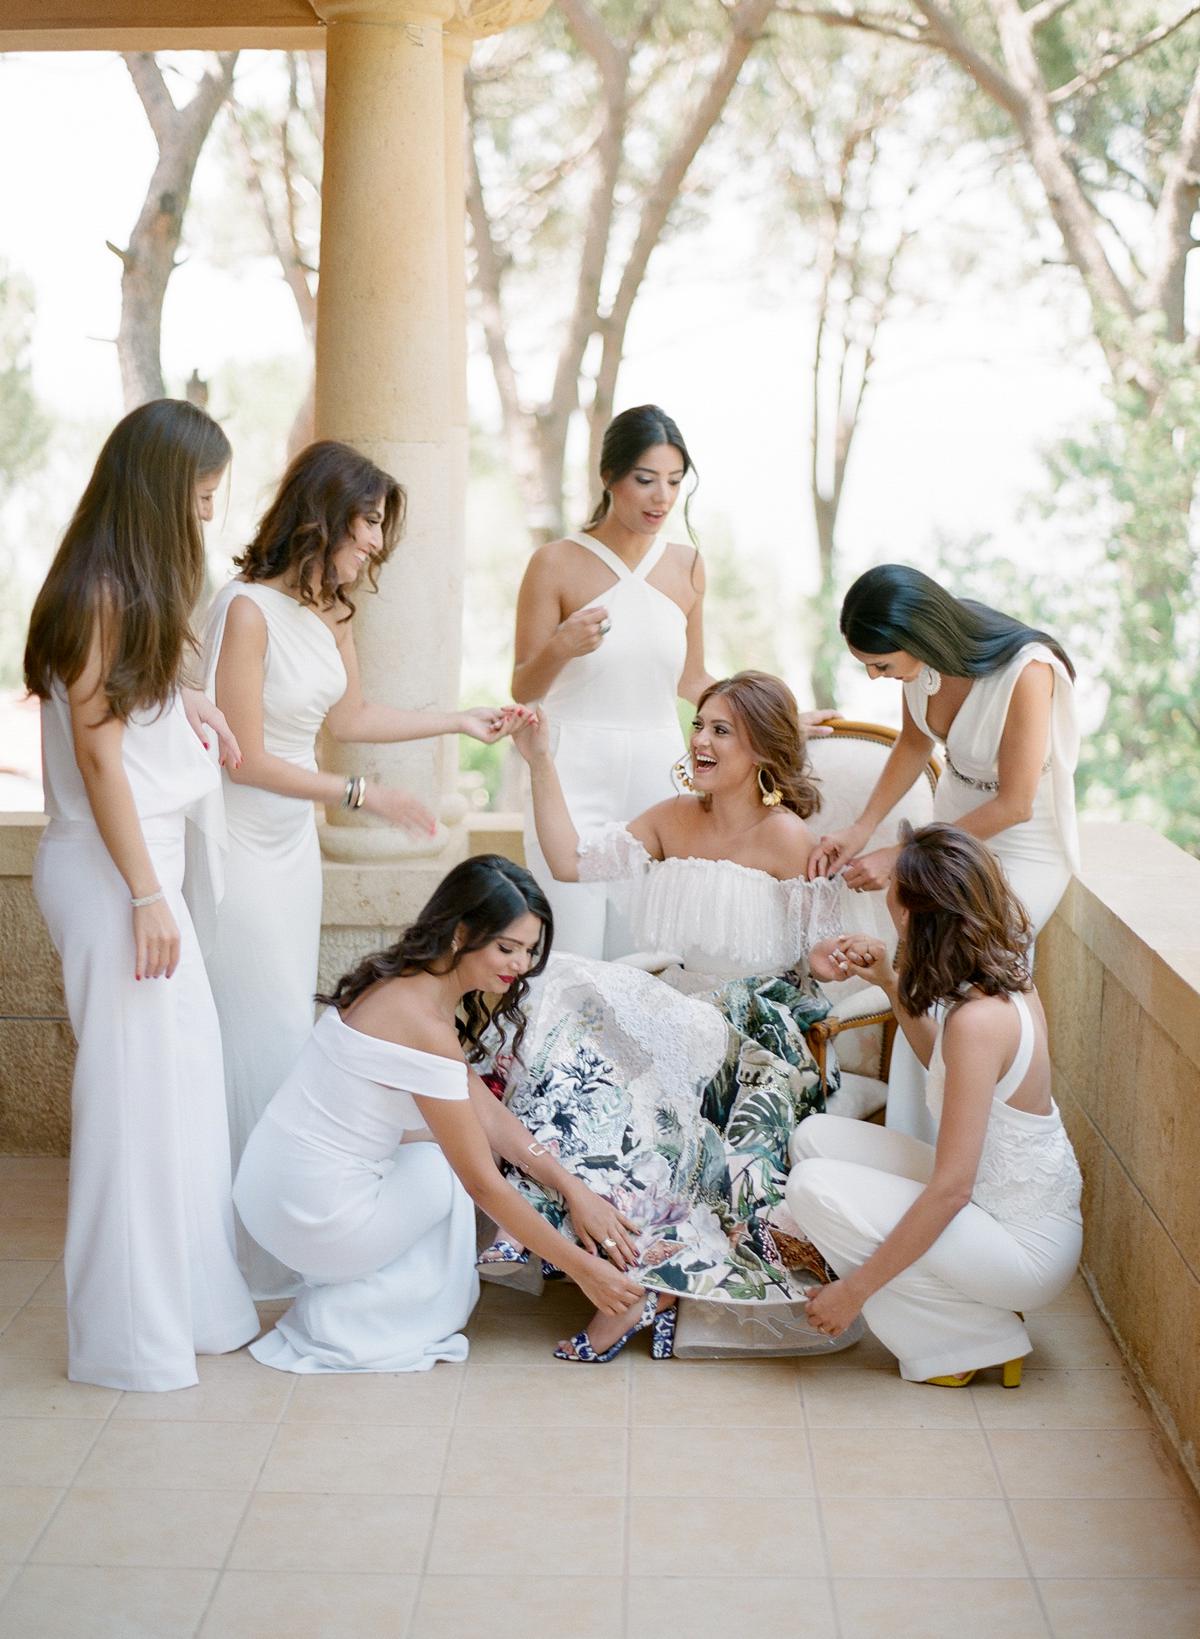 Bride wearing an amazing colorful Hussein Bazaza wedding dress with bridesmaids